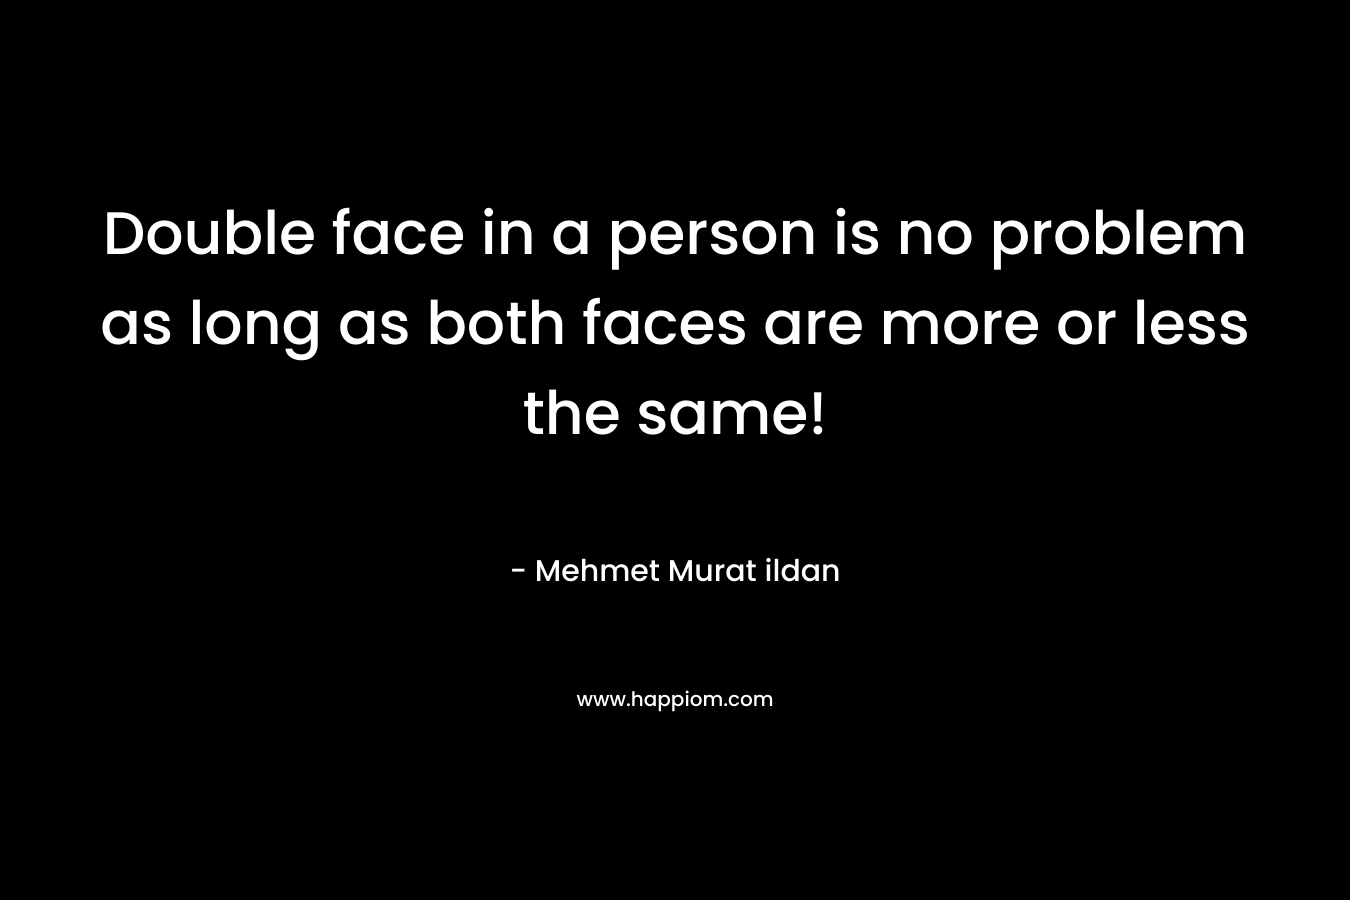 Double face in a person is no problem as long as both faces are more or less the same! – Mehmet Murat ildan